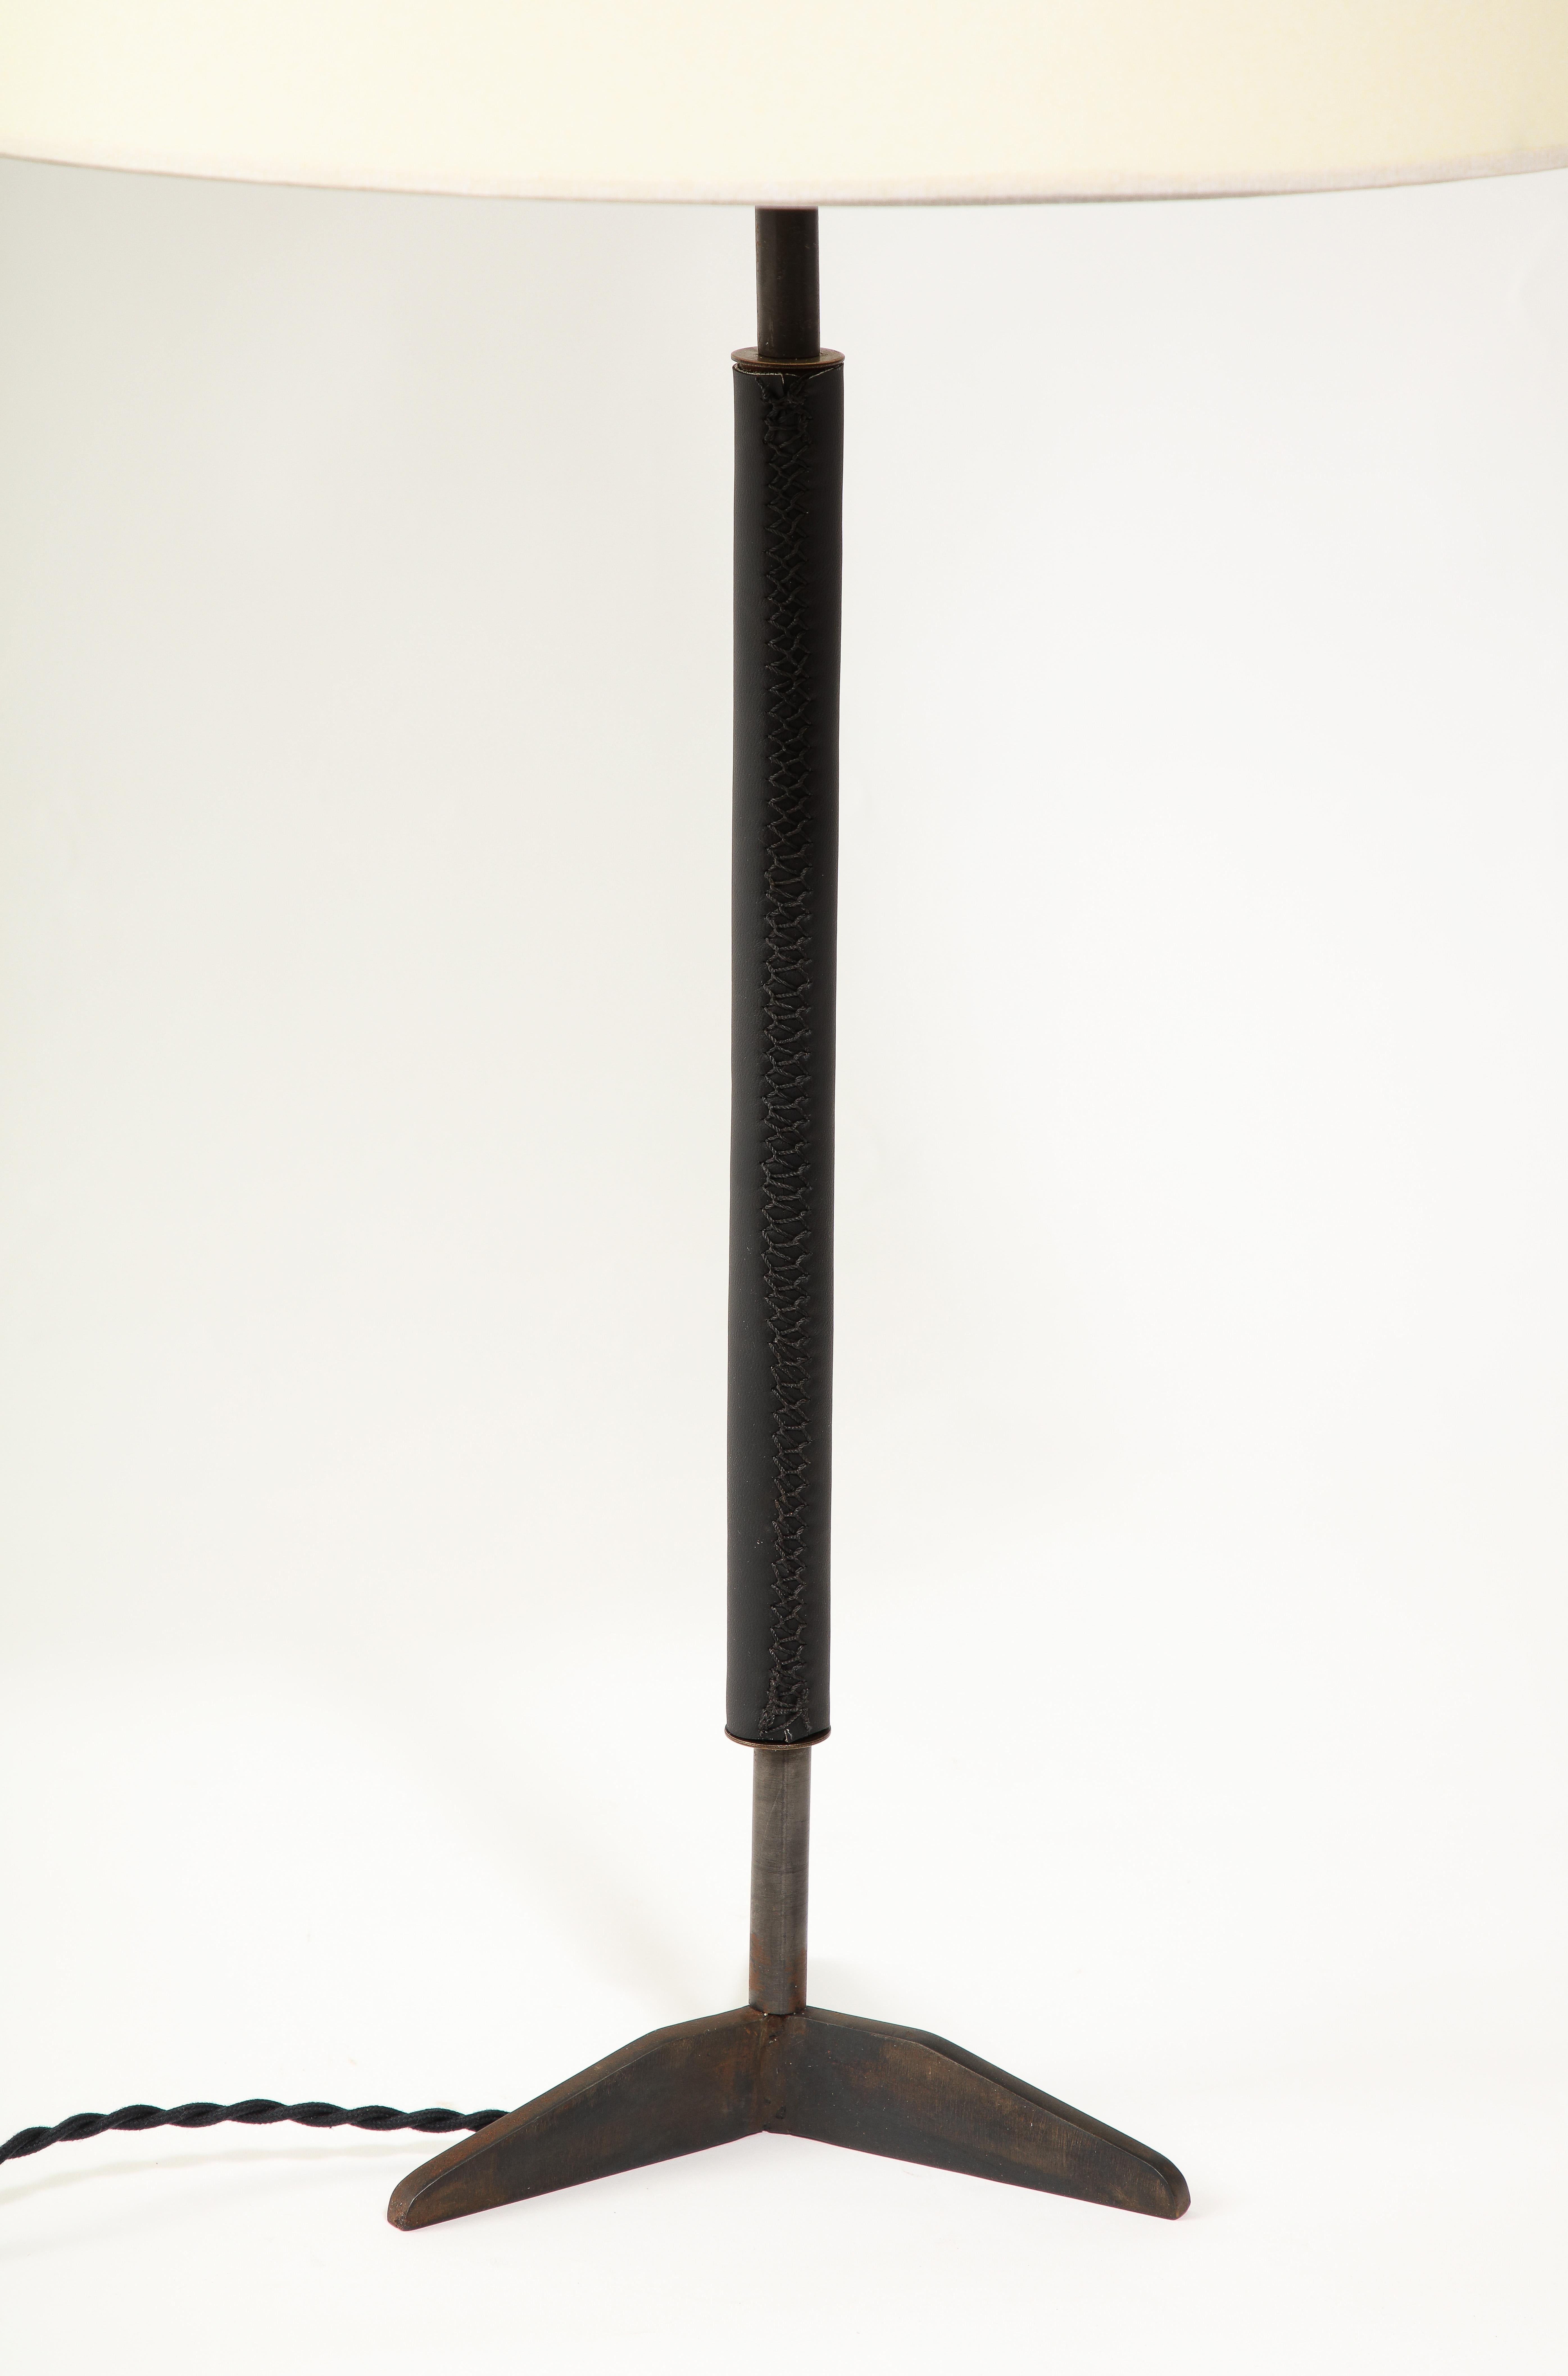 Blackened Steel & Leather Table Lamp, France 1950 In Good Condition For Sale In New York, NY